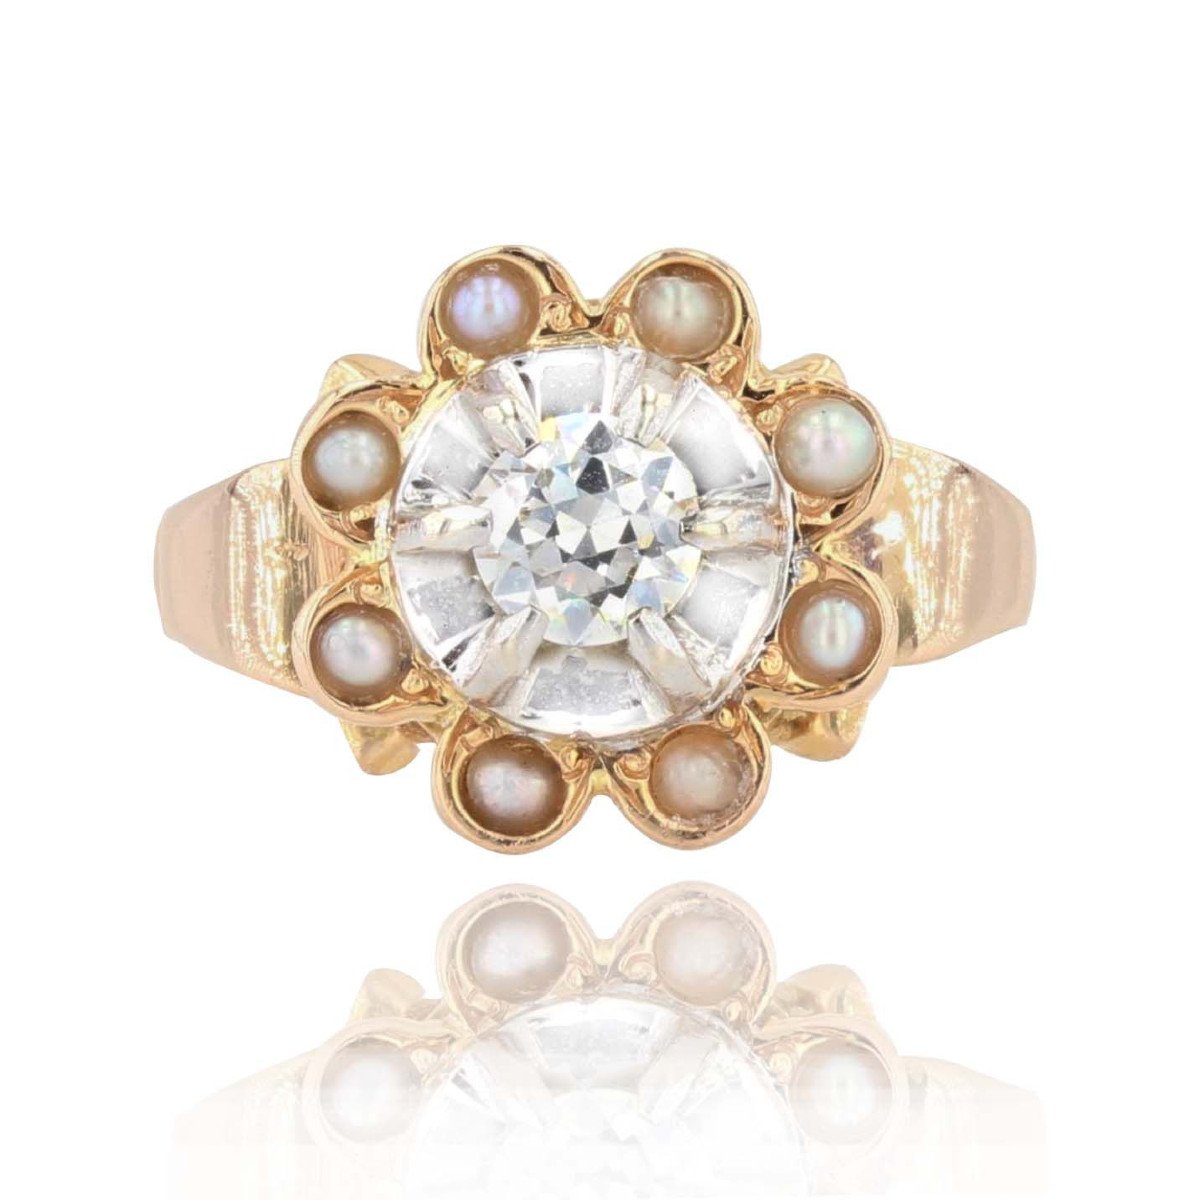 Old Diamond Ring Surrounded By Pearls